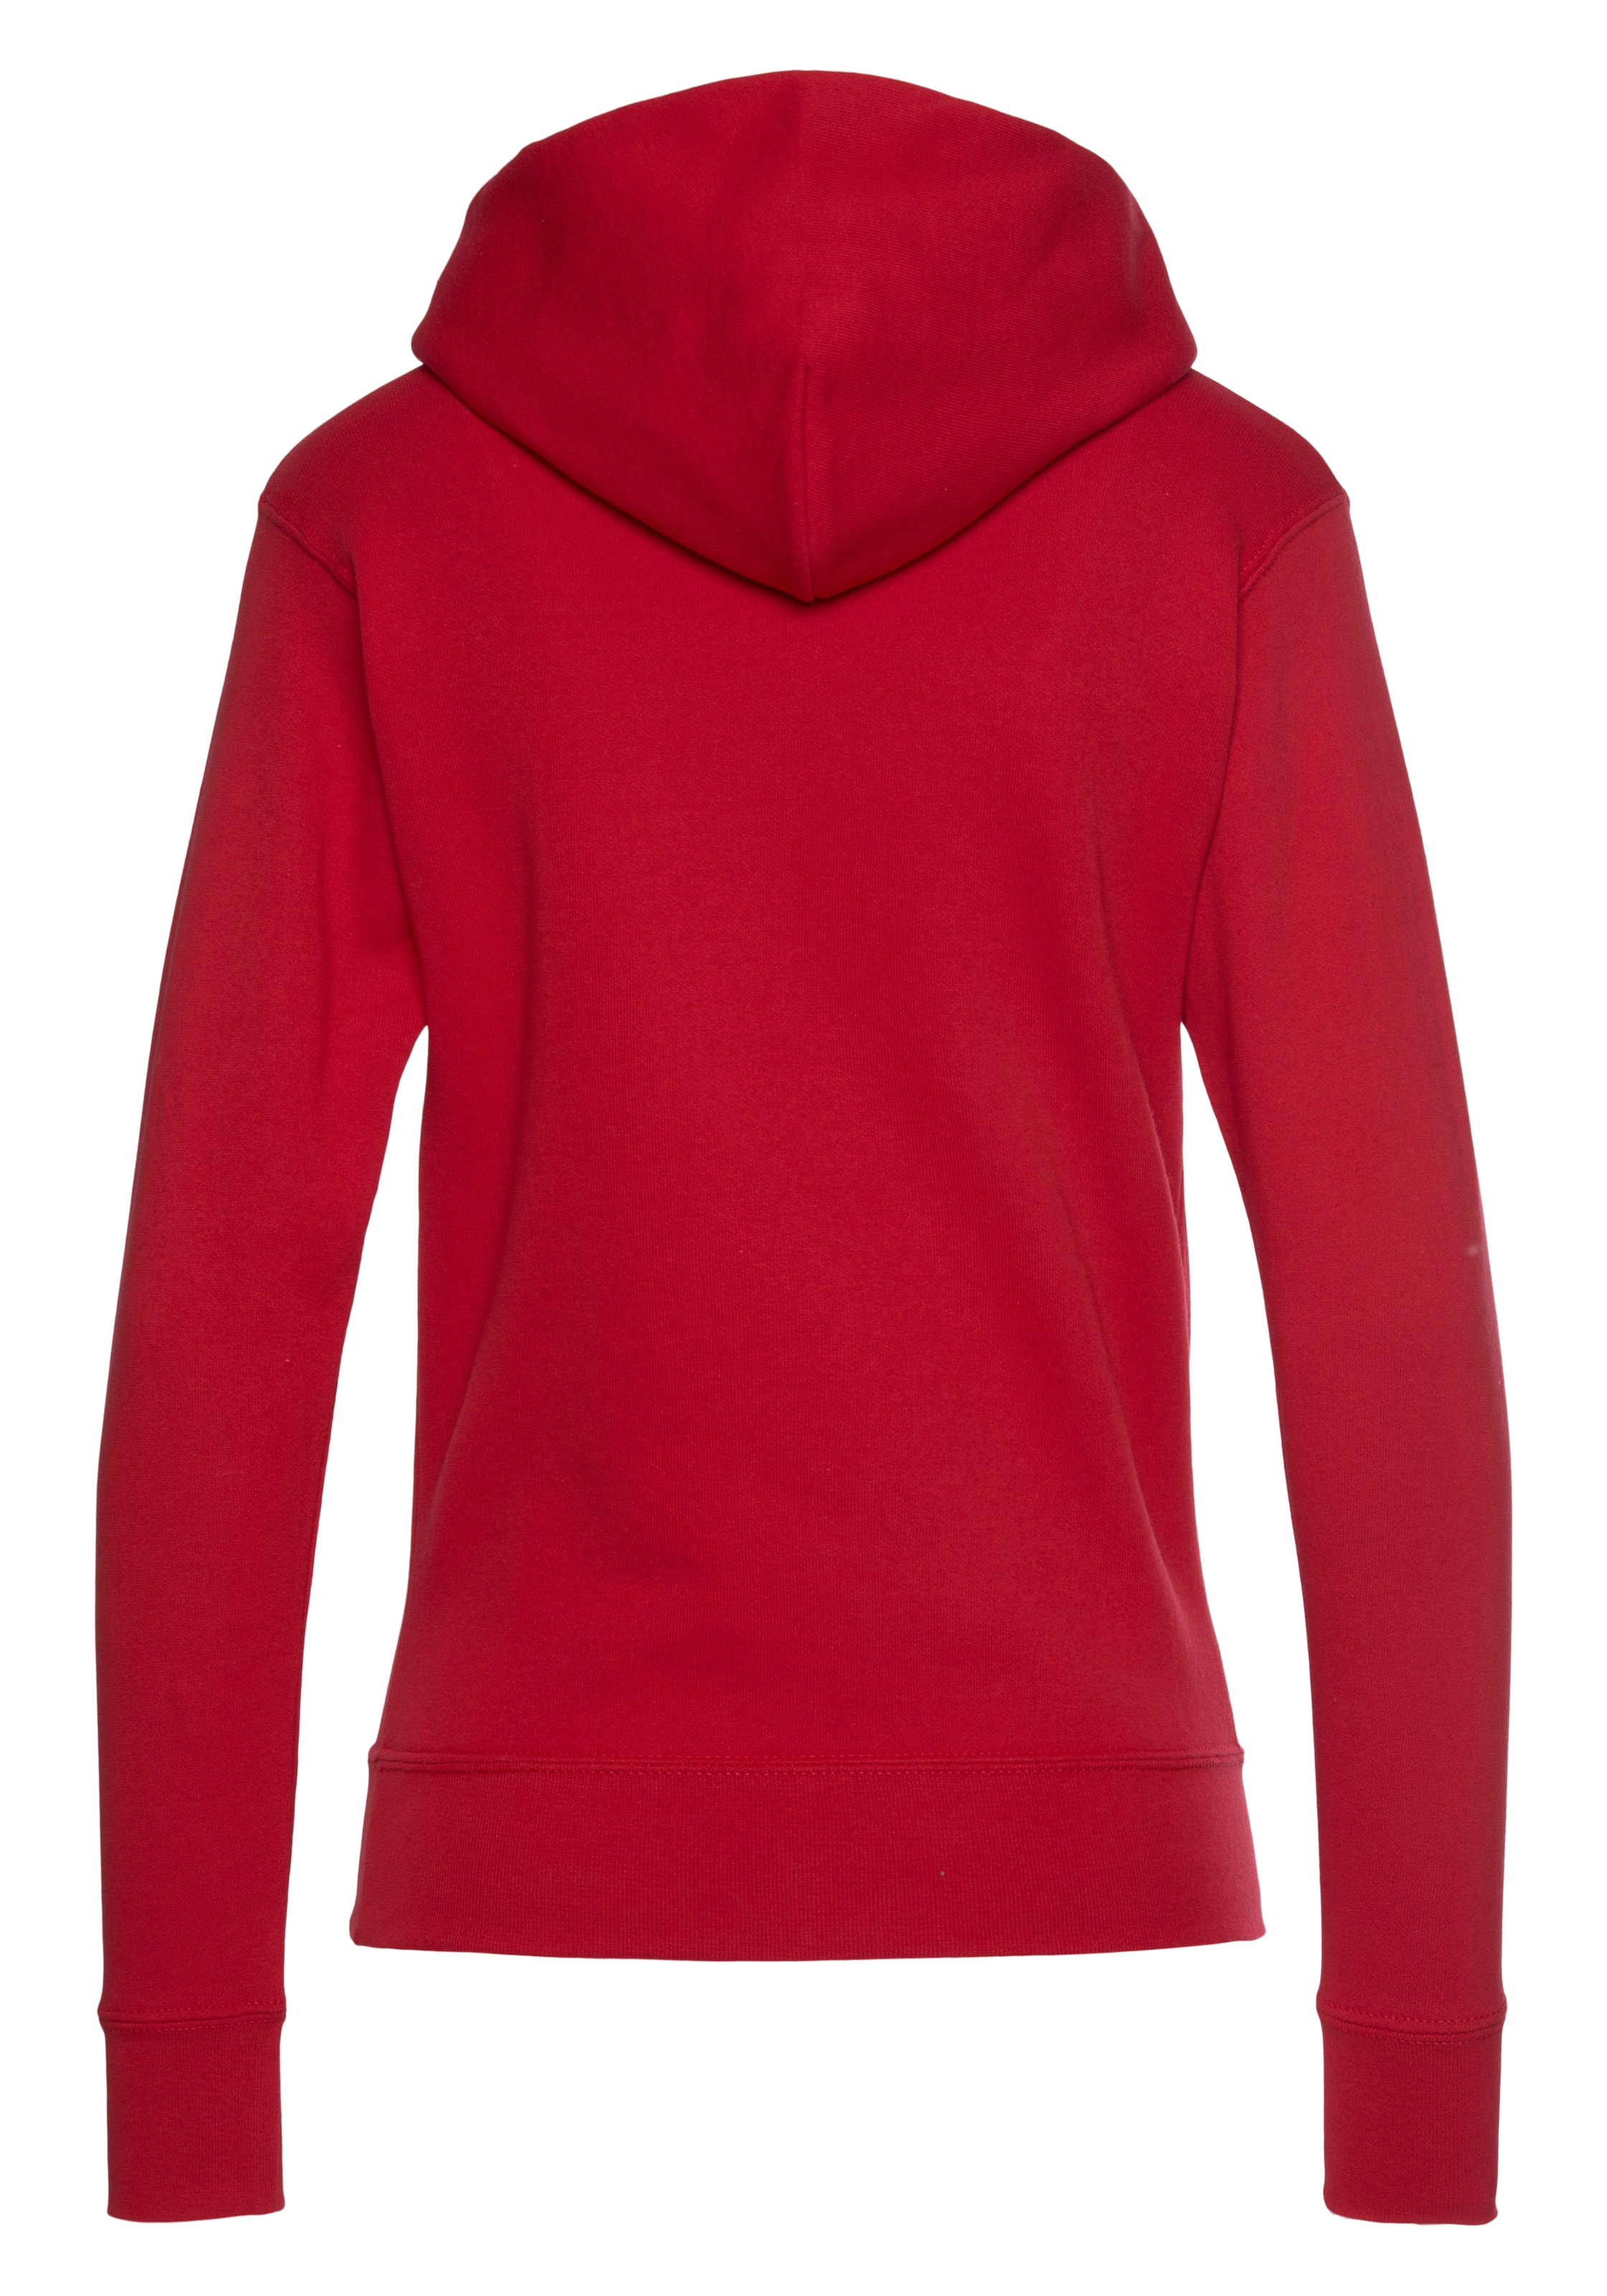 Fruit of the Loom Sweatshirt Sweat Lady-Fit« bei hooded OTTOversand »Classic